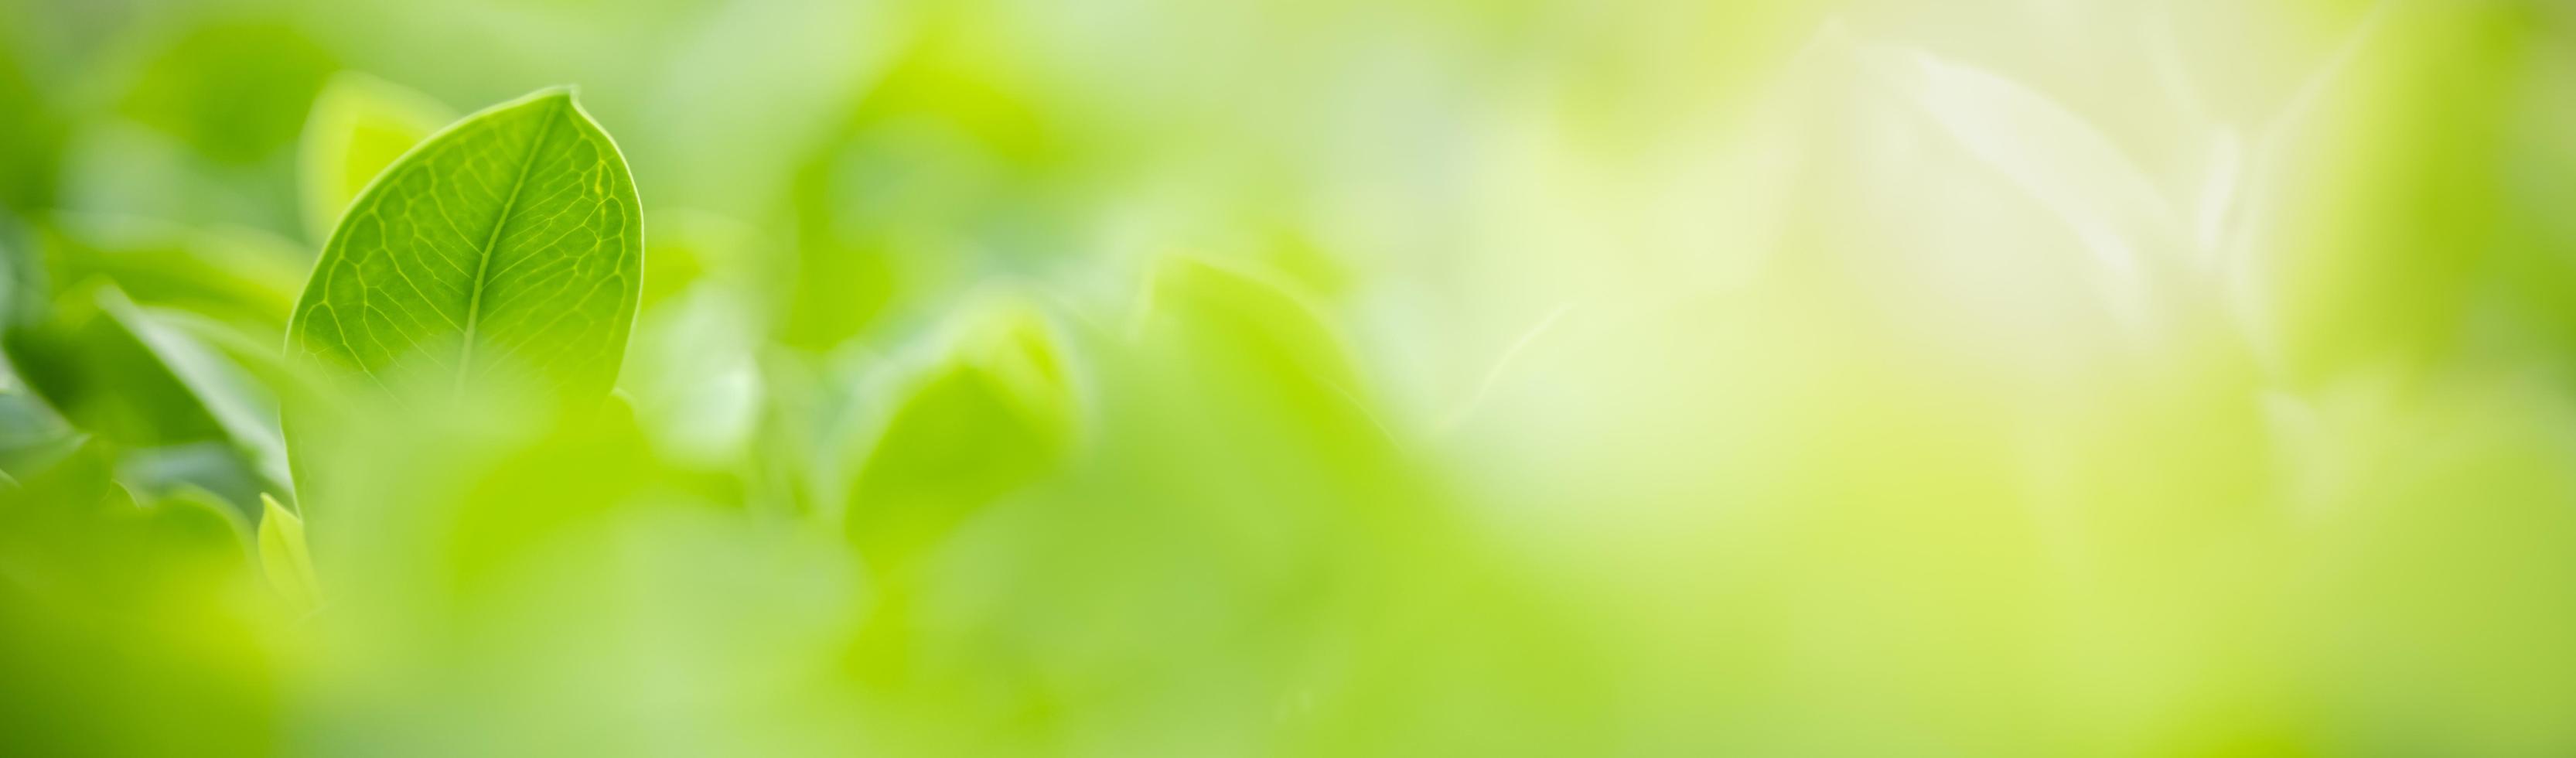 Close up of nature view green leaf on blurred greenery background under sunlight with bokeh and copy space using as background natural plants landscape, ecology cover concept. photo